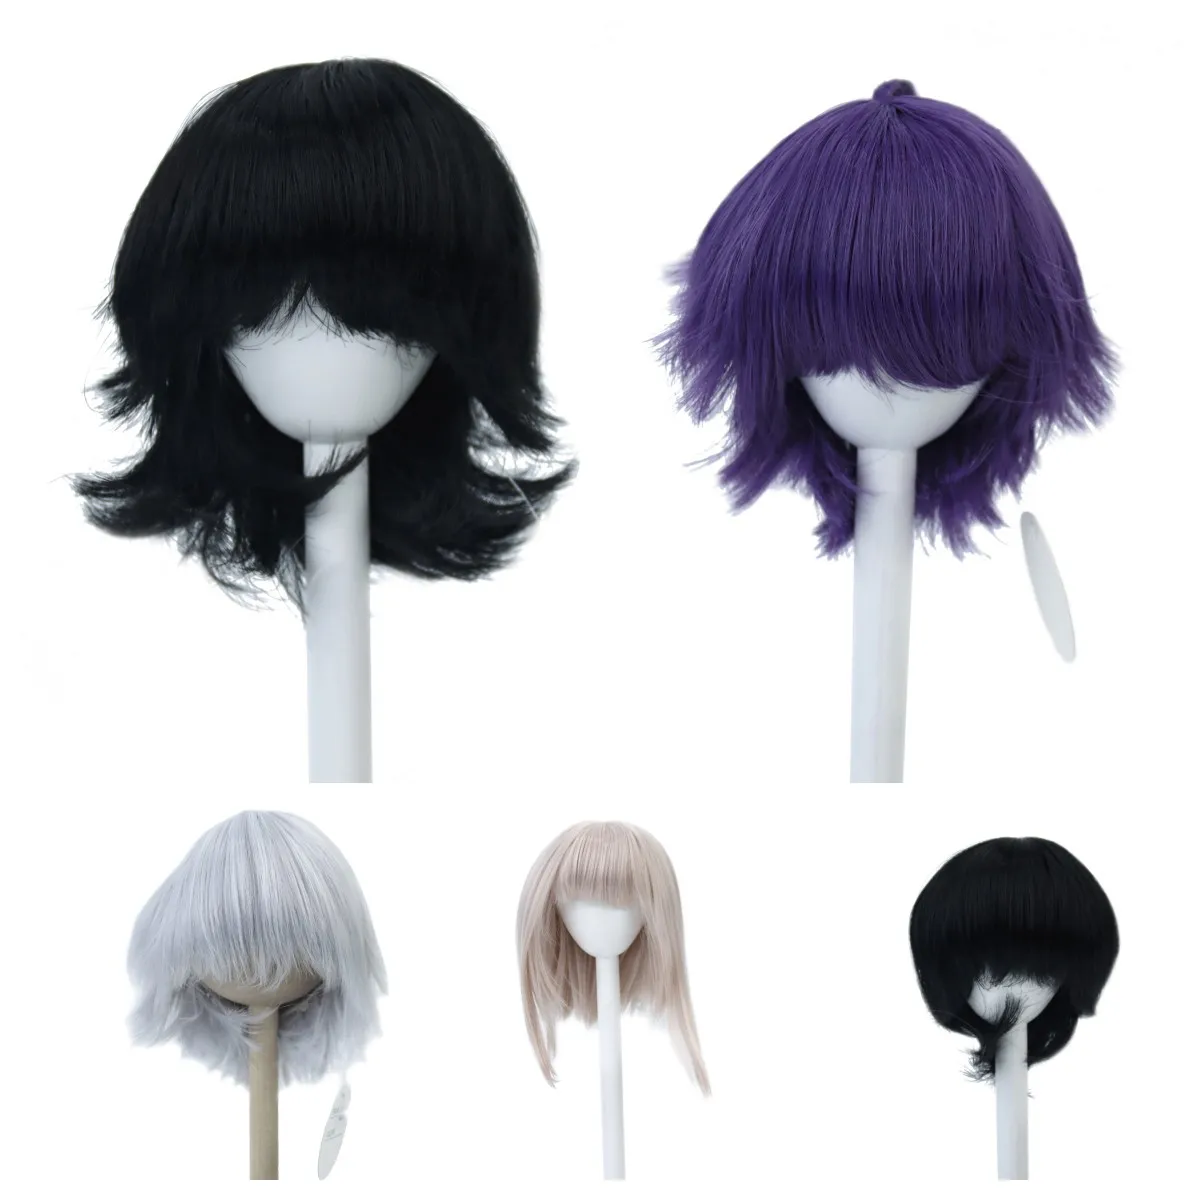 New 1/3 BJD Anime Doll Wigs Short Bobo With Bangs Purple White Black High Temperature Fiber For Dollfie Dream SD MSD Doll Hair red hot chili peppers return of the dream canteen purple 2винил